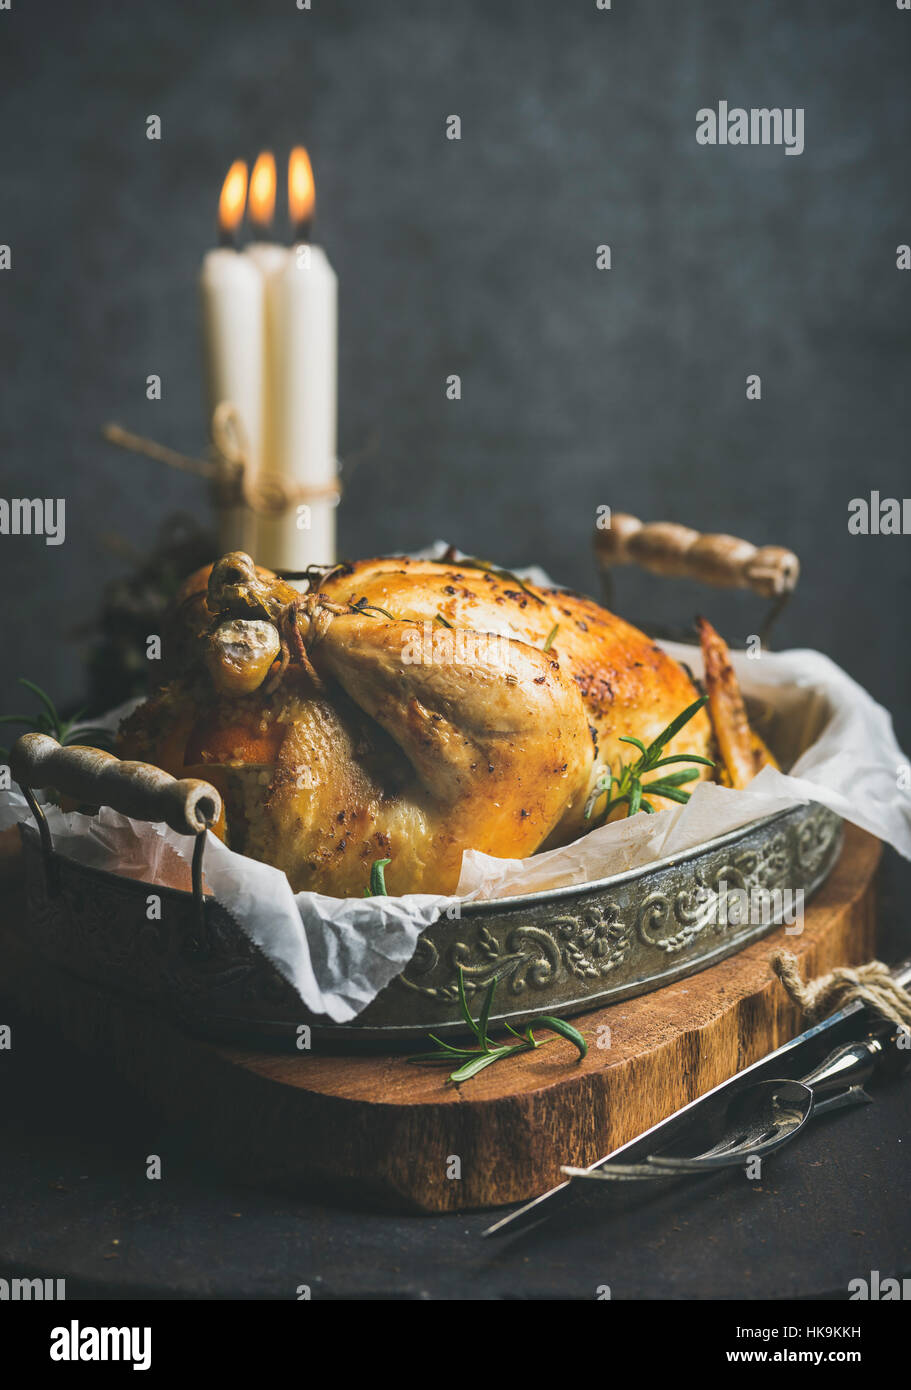 Christmas table set with oven roasted whole chicken with oranges, bulgur and rosemary, decorative candles on wooden board, grey concrete wall backgrou Stock Photo